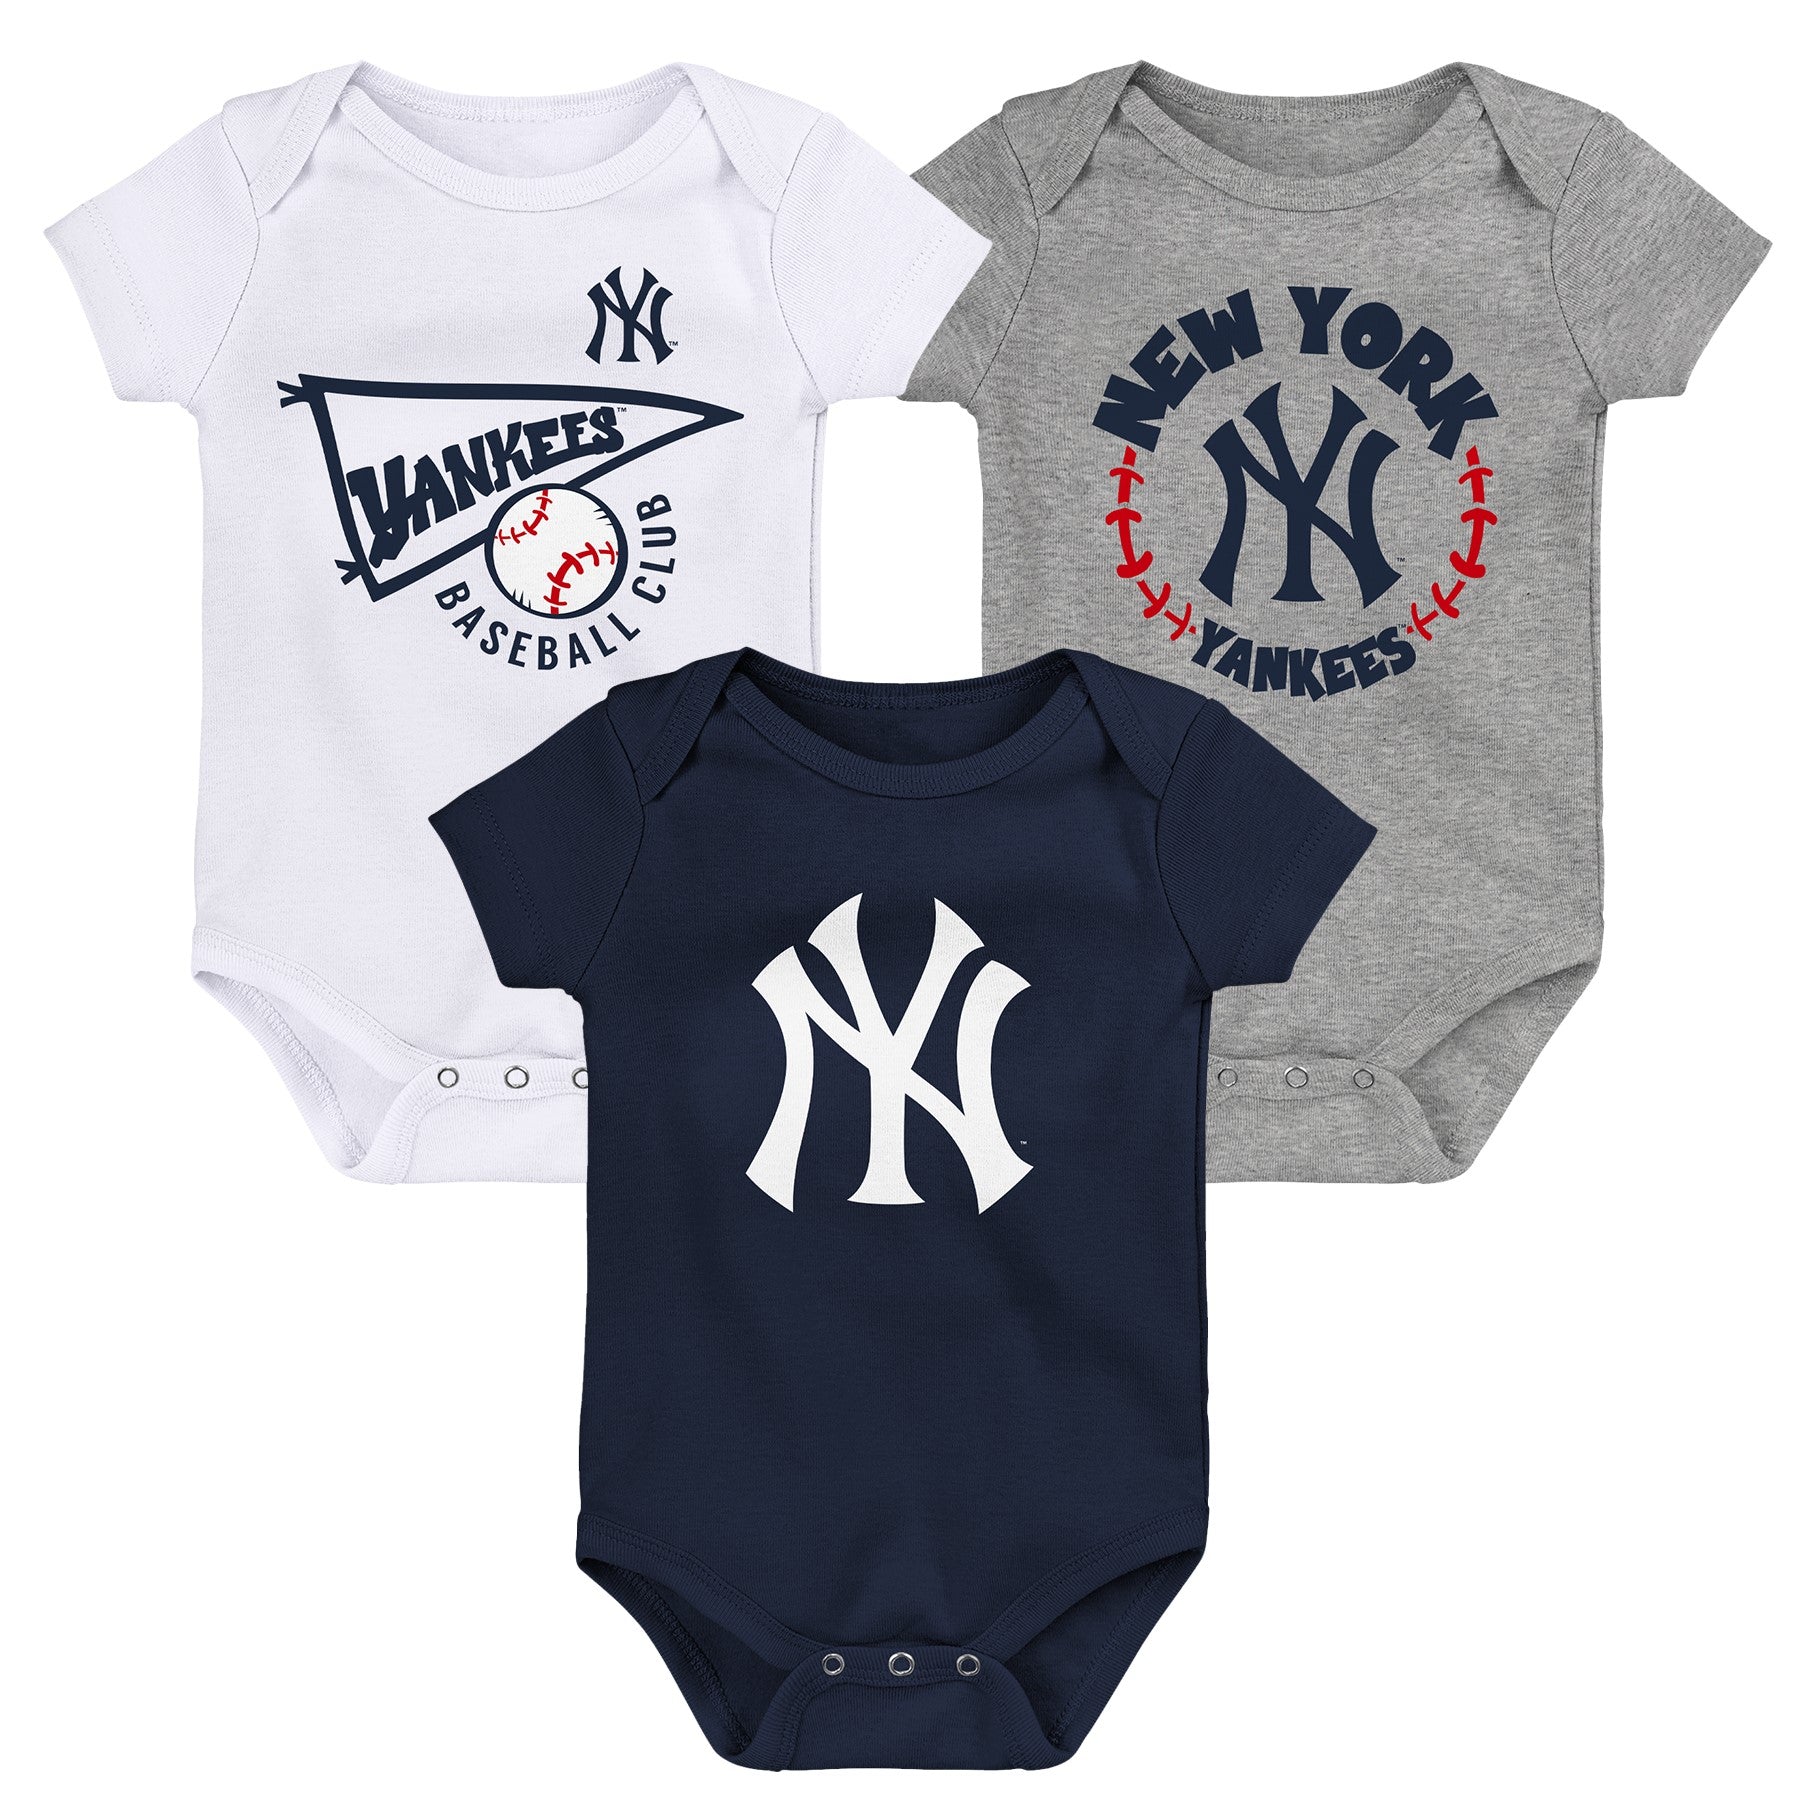 Clothing & Accessories – Babies R Us